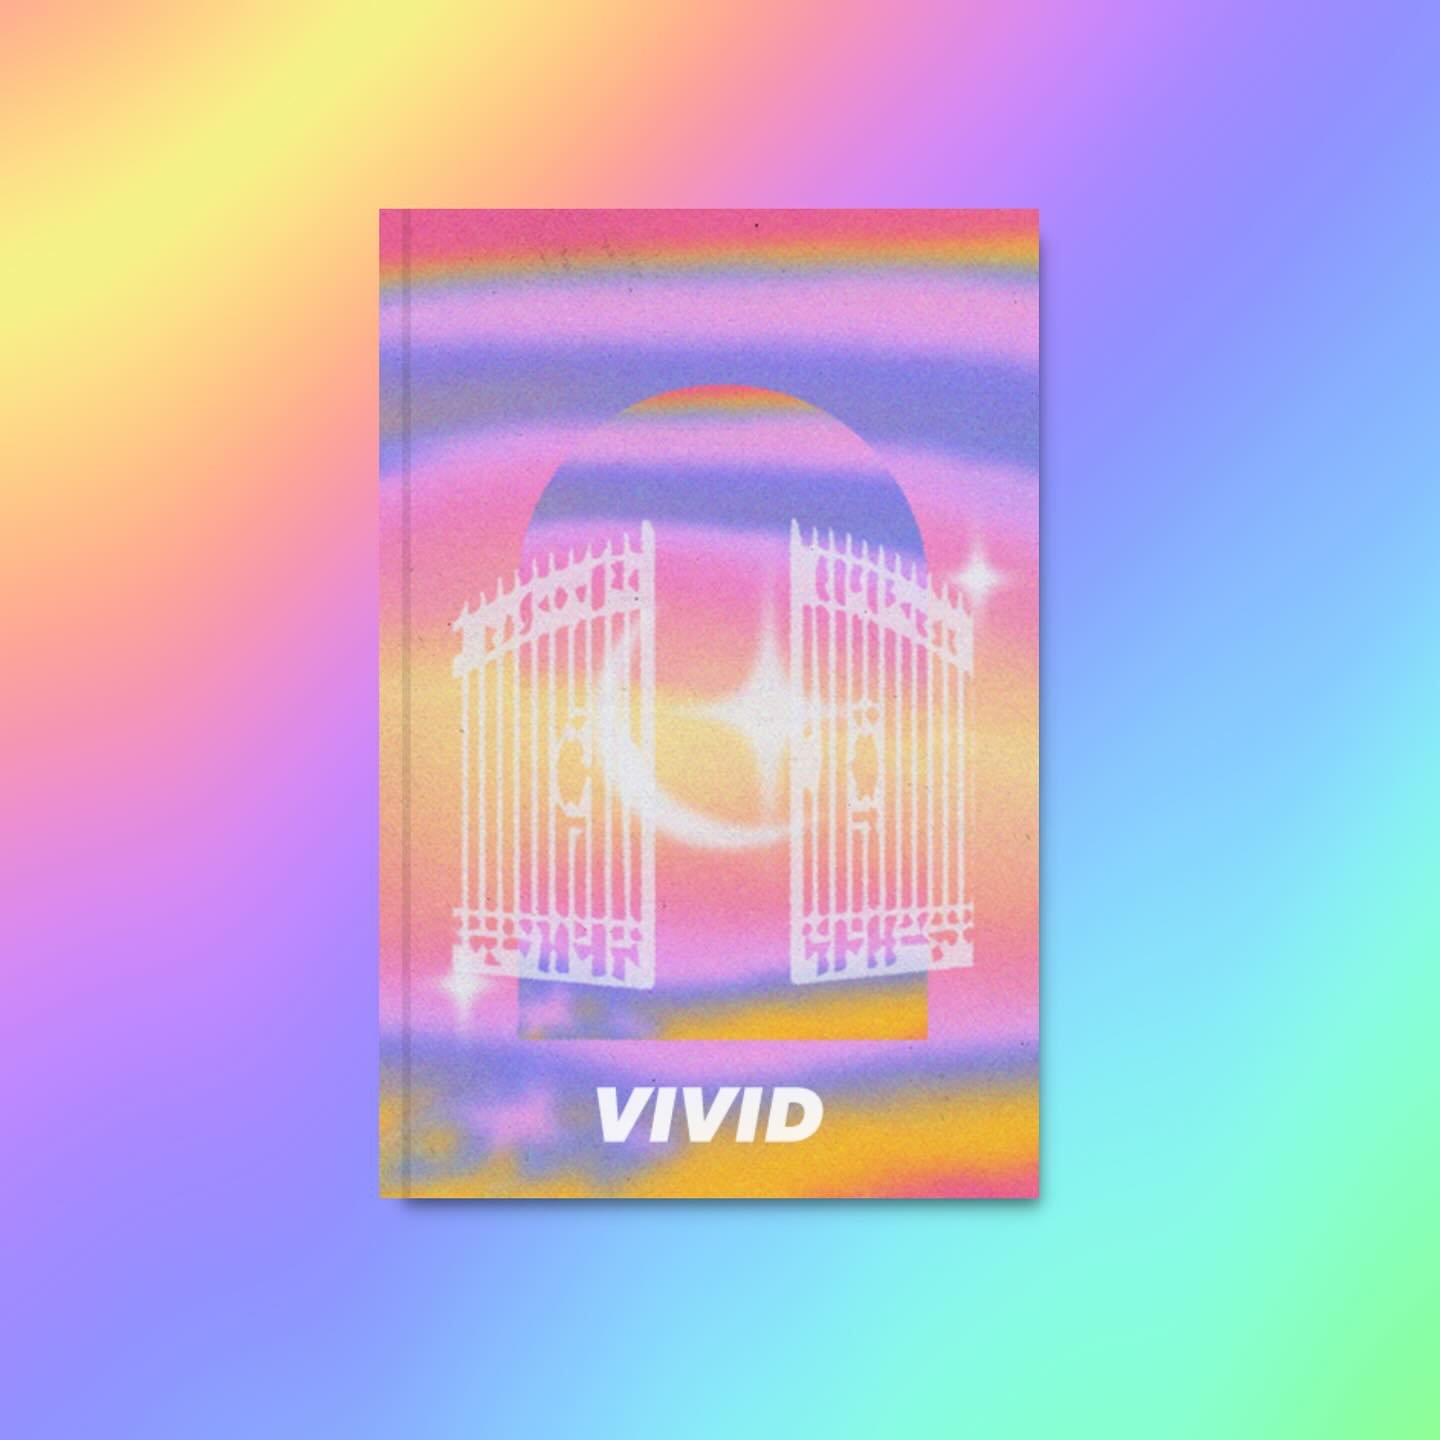 VIVID - out now ⭐️ VIVID is a 44 page zine featuring photos, words &amp; graphics by our team alongside out incredible creative audience.&nbsp;

Thank you to everyone that made this project possible, it&rsquo;s always such an honor to be able to work